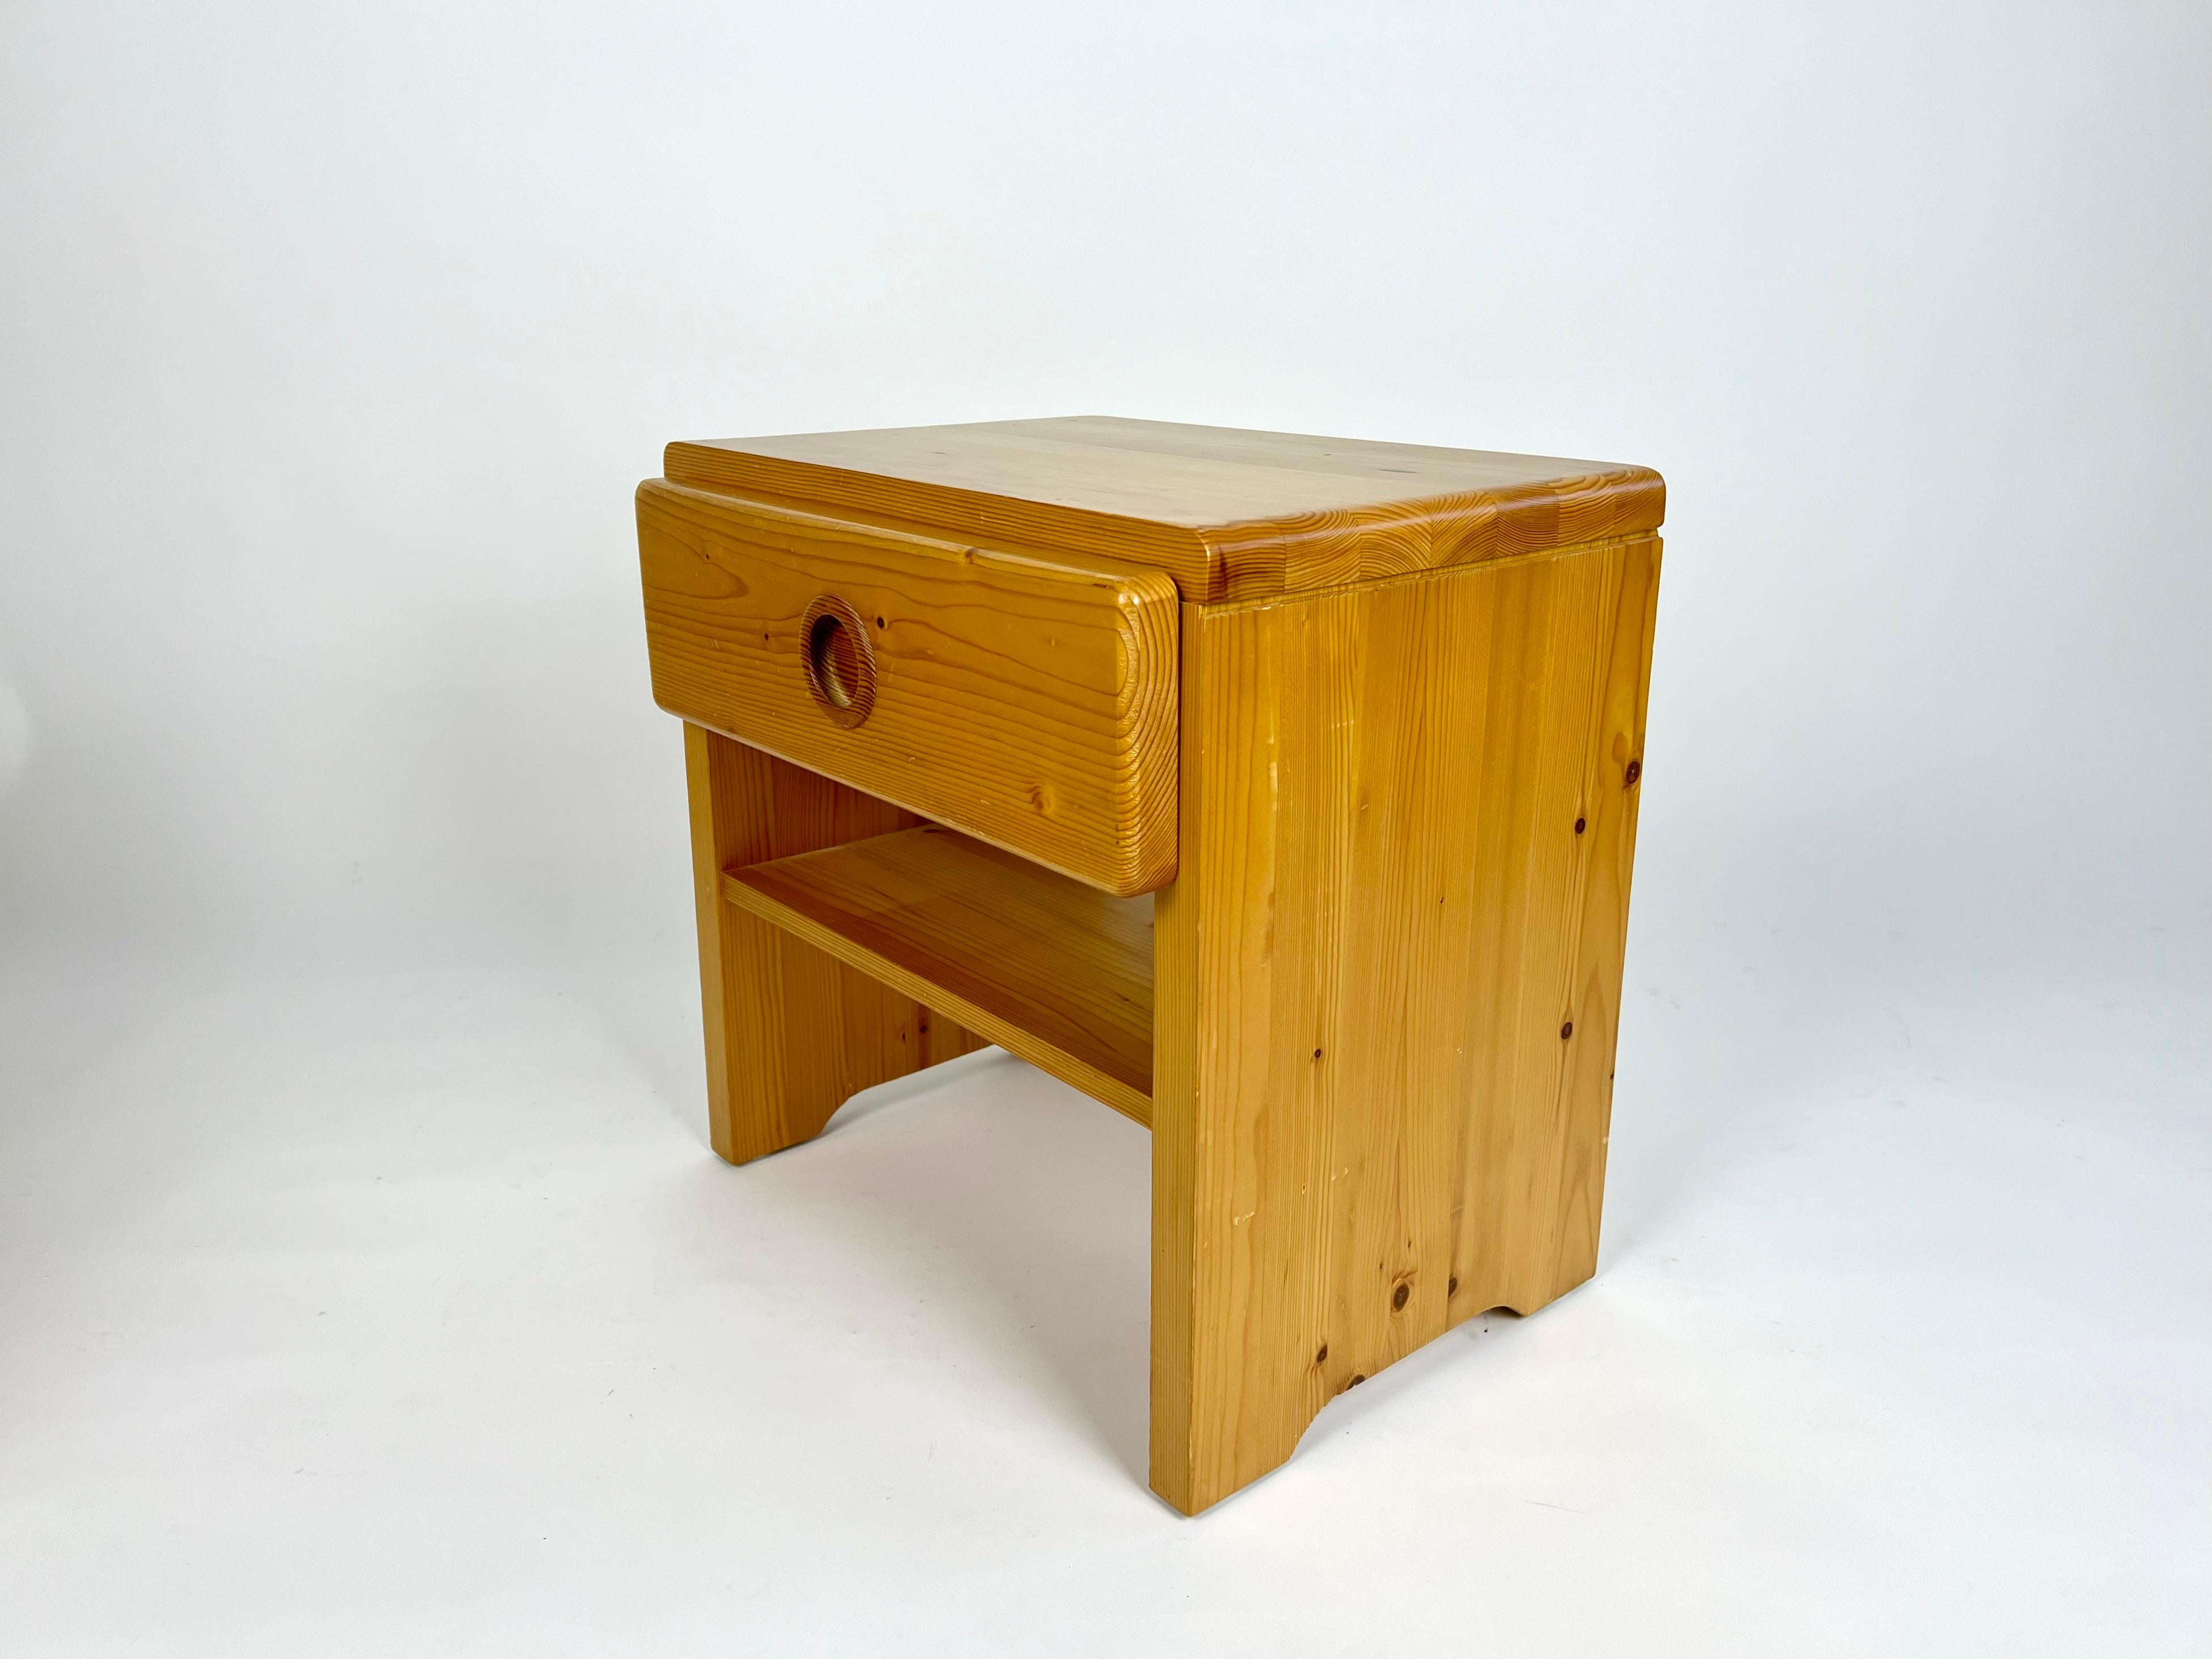 French Vintage pine bedside table from Les Arcs, France. Charlotte Perriand